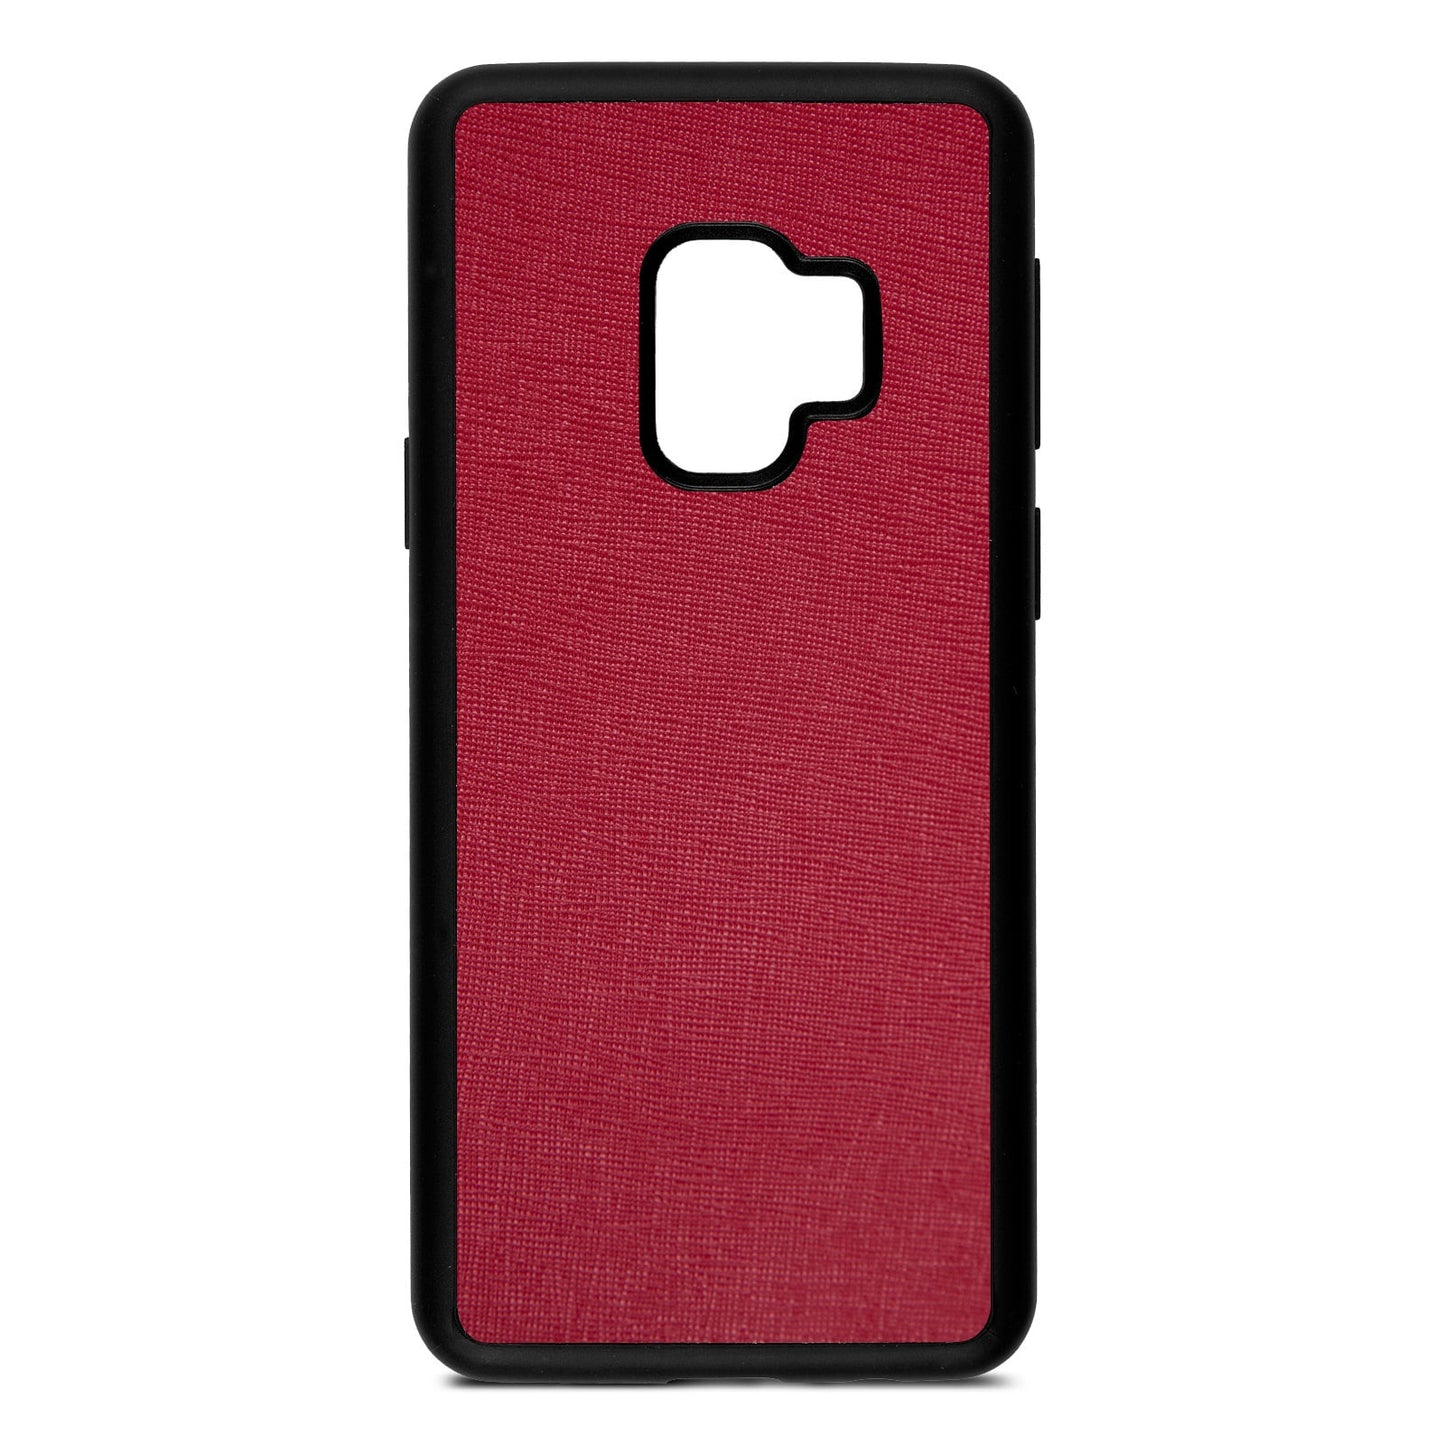 Blank Personalised Dark Red Saffiano Leather Samsung S9 Case